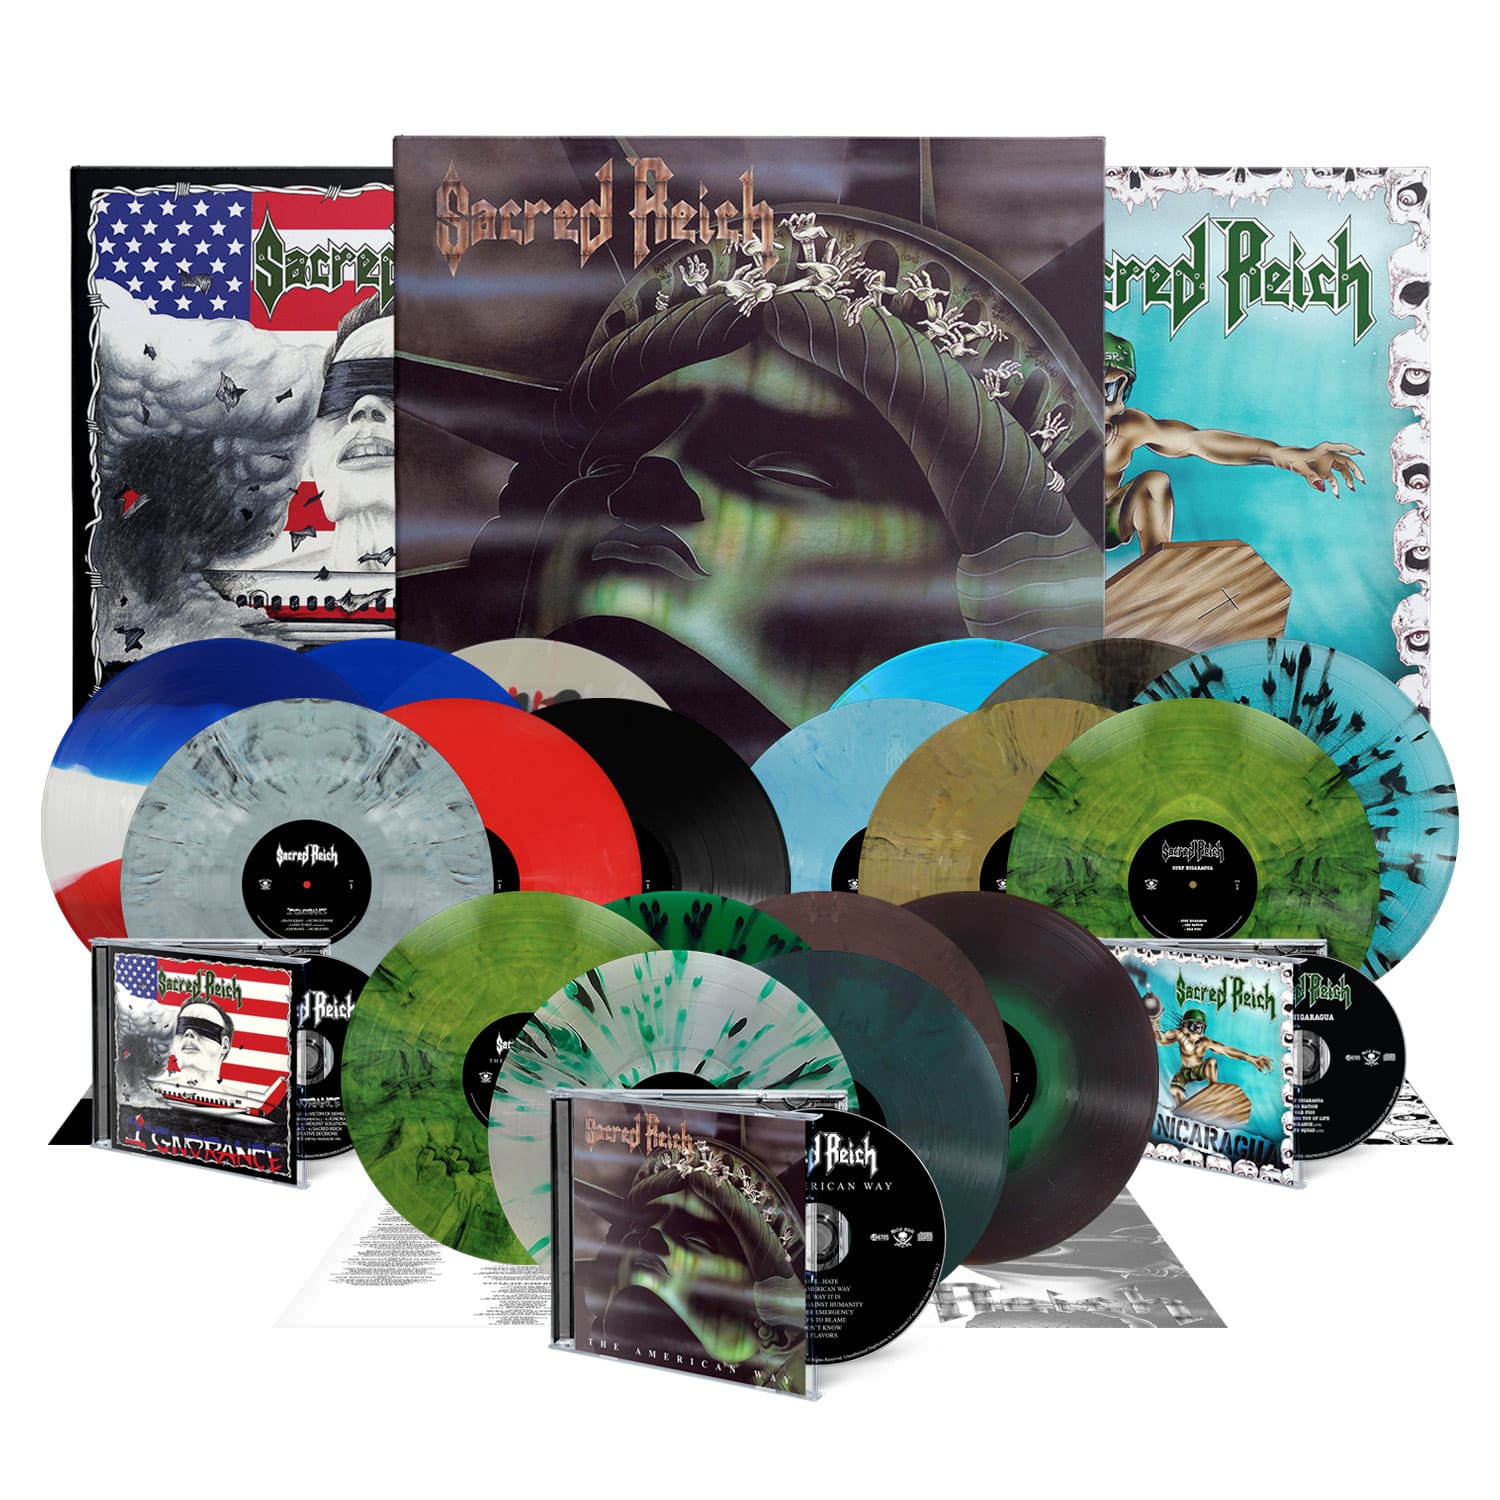 SACRED REICH reissues in CDs and LPs